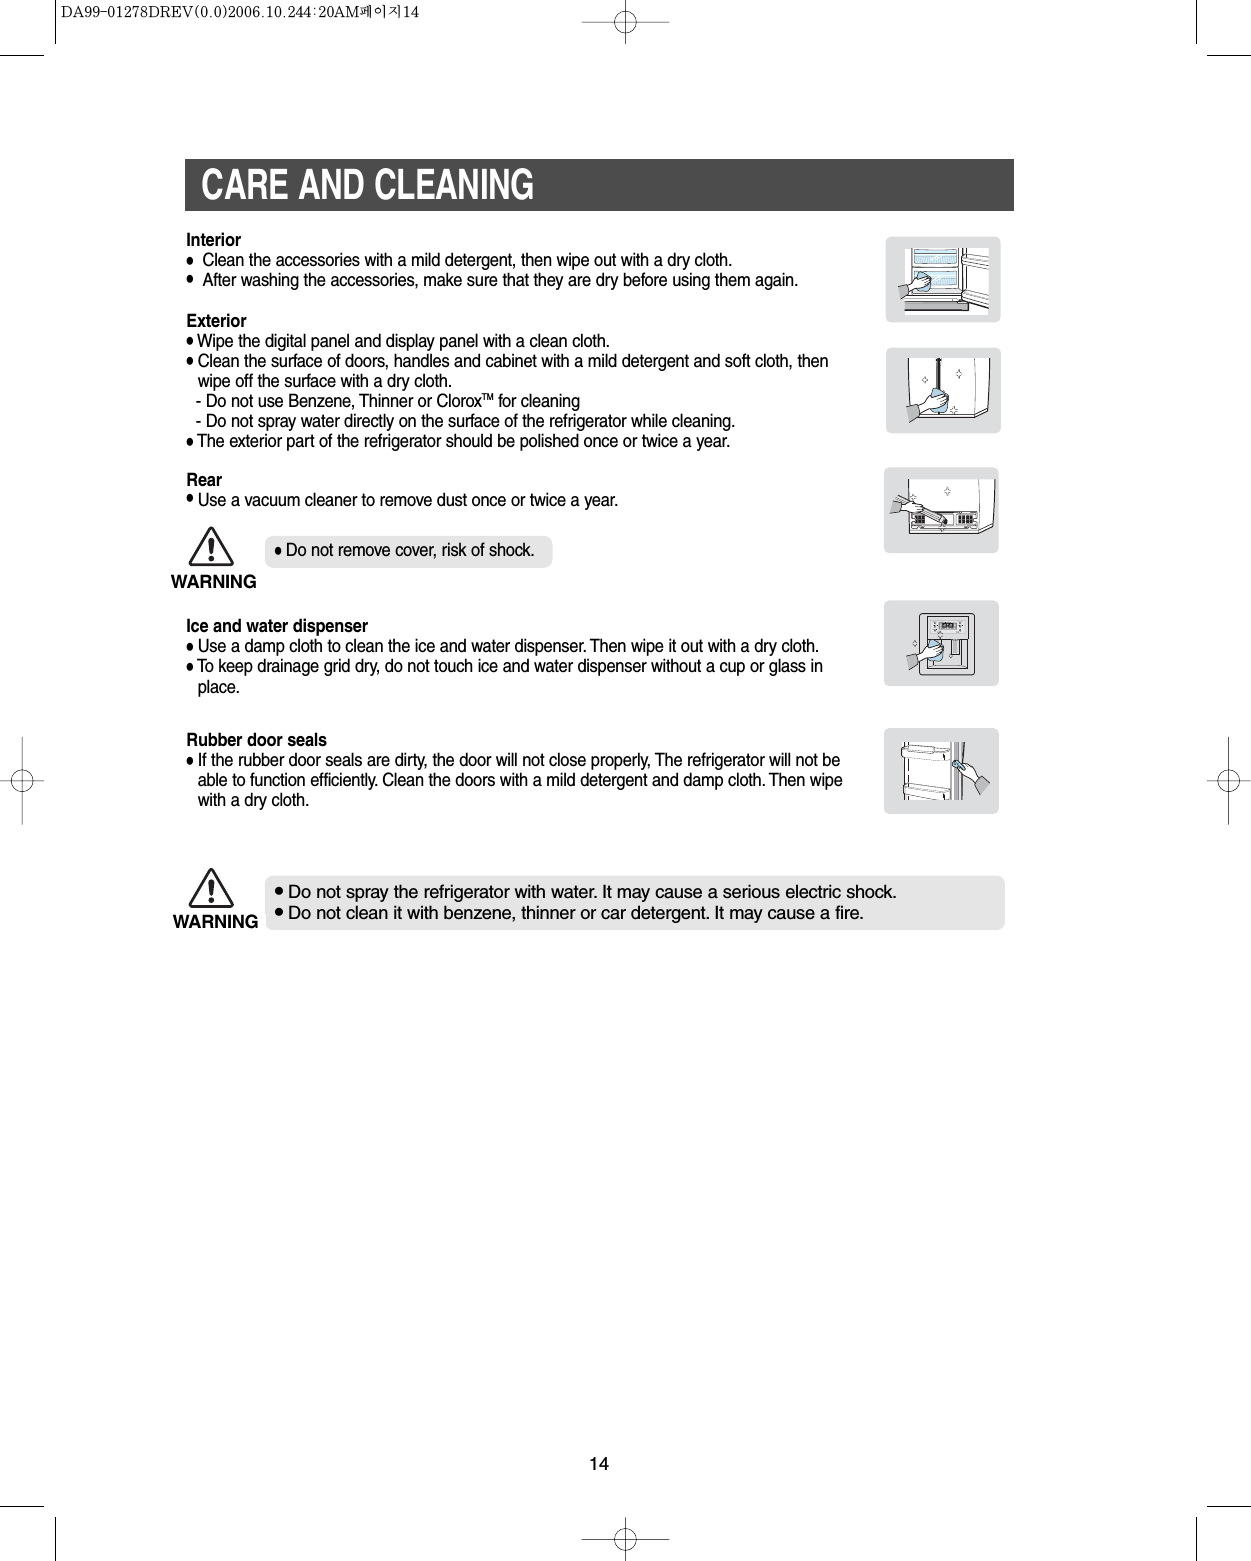 14CARE AND CLEANING•Do not spray the refrigerator with water. It may cause a serious electric shock.•Do not clean it with benzene, thinner or car detergent. It may cause a fire.Rubber door seals•If the rubber door seals are dirty, the door will not close properly, The refrigerator will not beable to function efficiently. Clean the doors with a mild detergent and damp cloth. Then wipewith a dry cloth.Ice and water dispenser •Use a damp cloth to clean the ice and water dispenser. Then wipe it out with a dry cloth.•To keep drainage grid dry, do not touch ice and water dispenser without a cup or glass inplace.Interior•Clean the accessories with a mild detergent, then wipe out with a dry cloth.•After washing the accessories, make sure that they are dry before using them again.Exterior•Wipe the digital panel and display panel with a clean cloth.•Clean the surface of doors, handles and cabinet with a mild detergent and soft cloth, thenwipe off the surface with a dry cloth.- Do not use Benzene, Thinner or CloroxTMfor cleaning- Do not spray water directly on the surface of the refrigerator while cleaning.•The exterior part of the refrigerator should be polished once or twice a year.Rear•Use a vacuum cleaner to remove dust once or twice a year.WARNING•Do not remove cover, risk of shock.WARNING